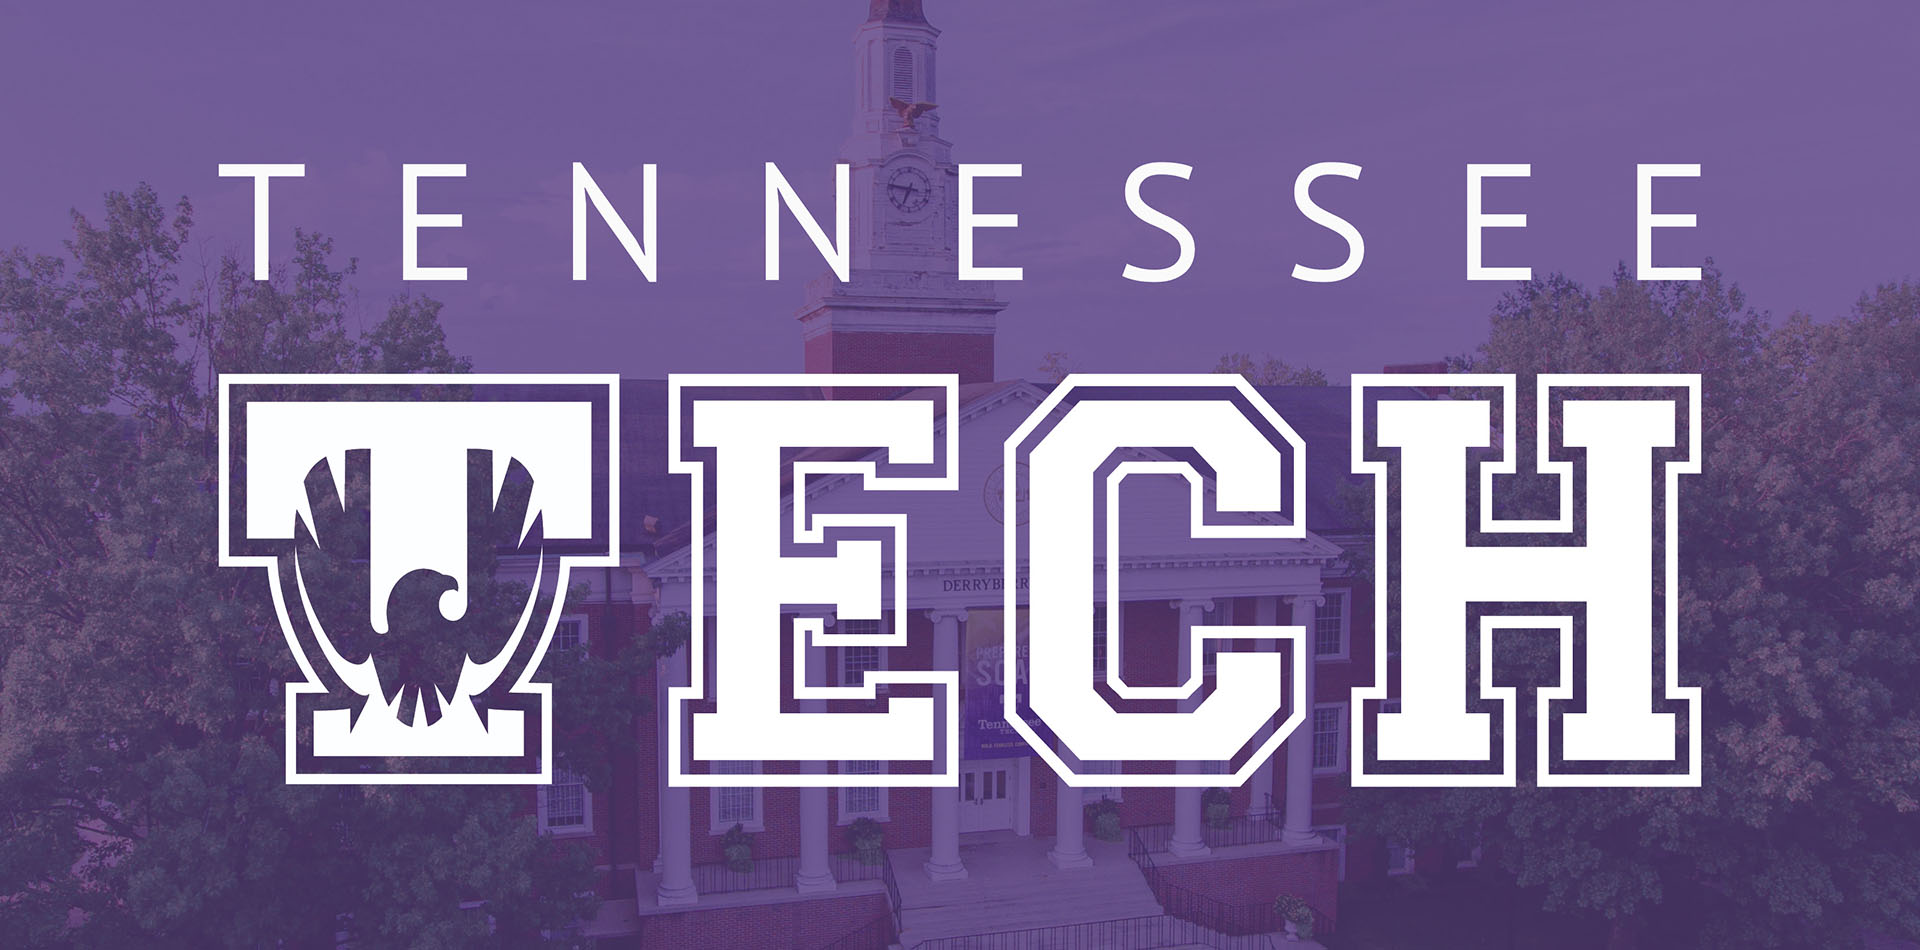 Tennessee Tech graphic treatment